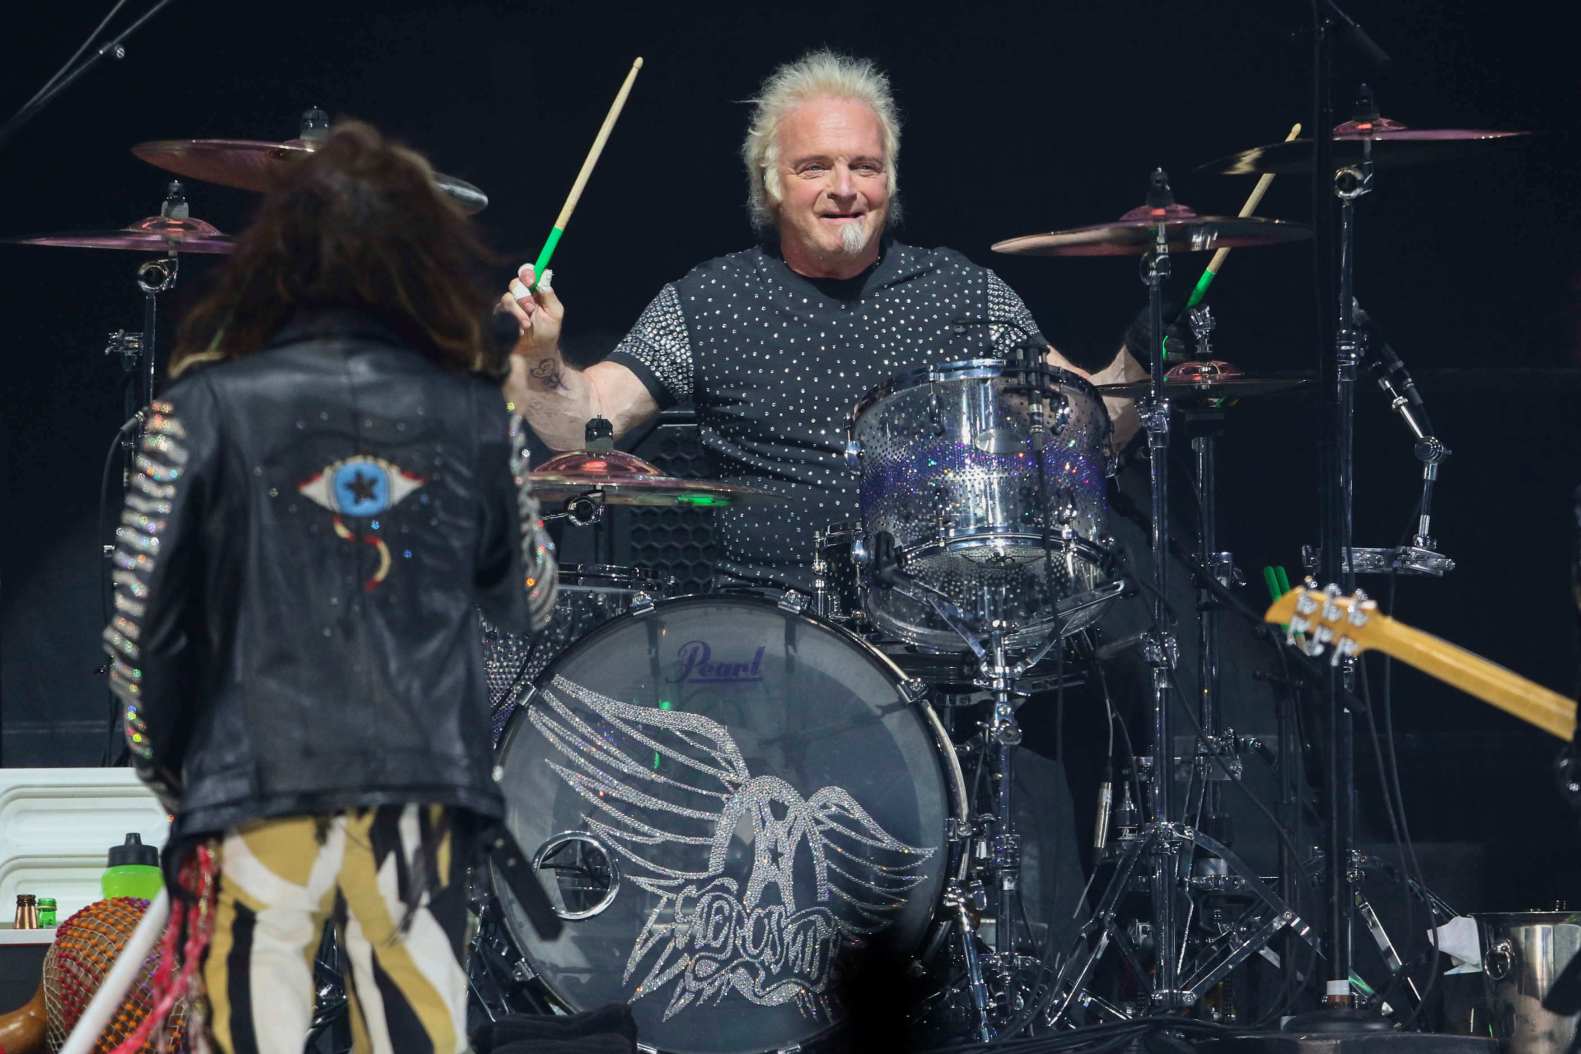 Aerosmiths joey kramer disappointed by court ruling on grammys â rolling stone